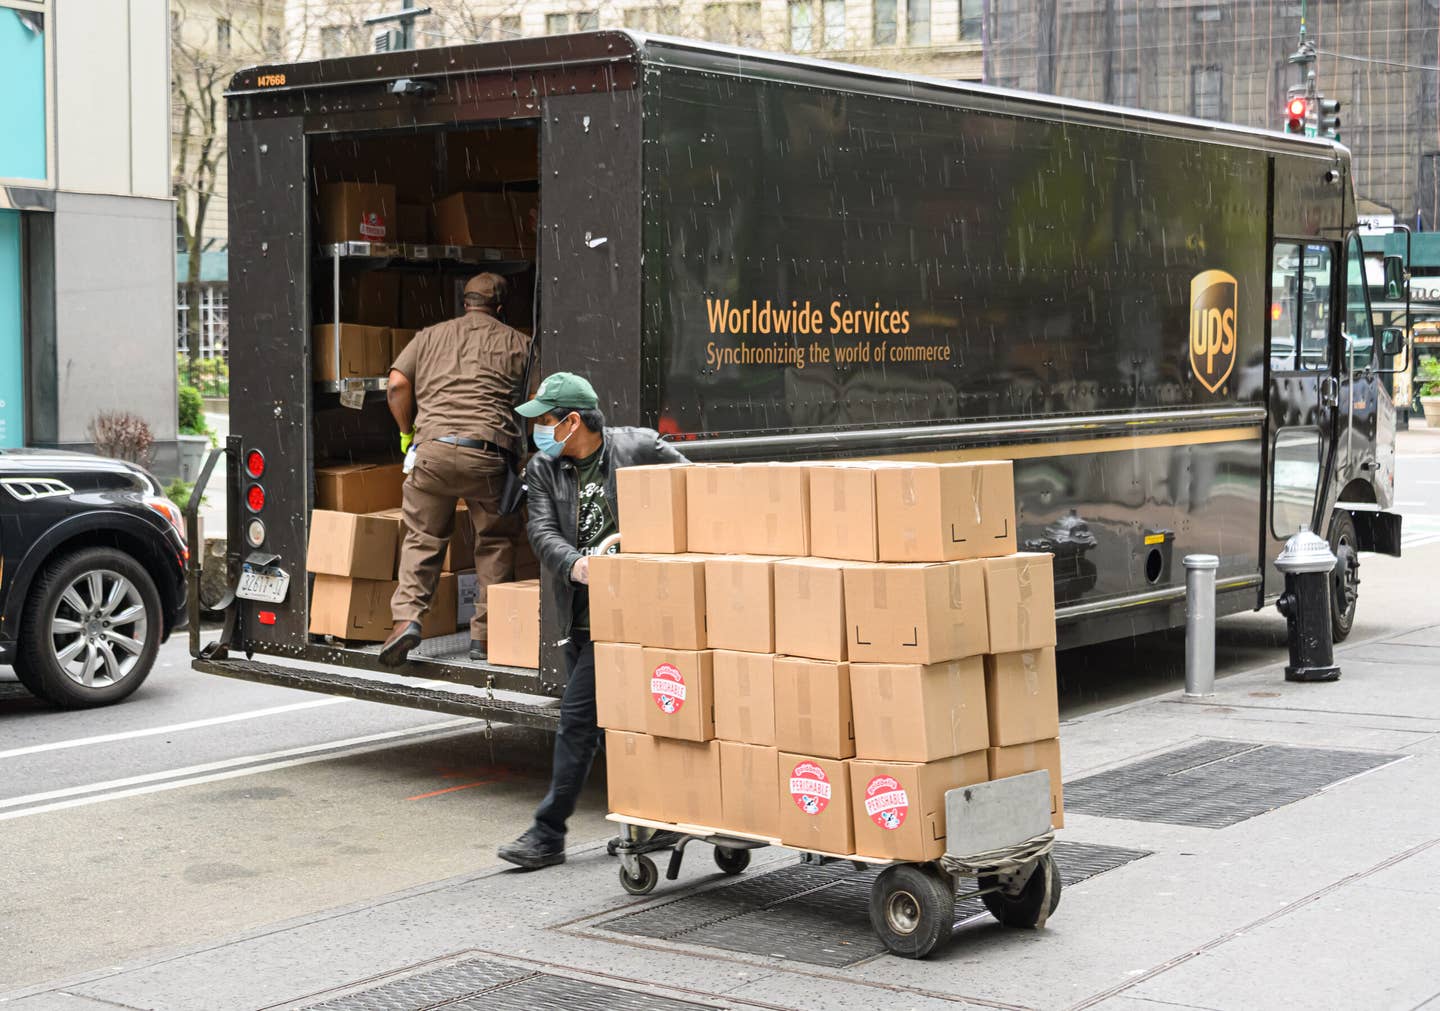 New UPS Trucks Will Get Air Conditioning After Years of Driver Demands